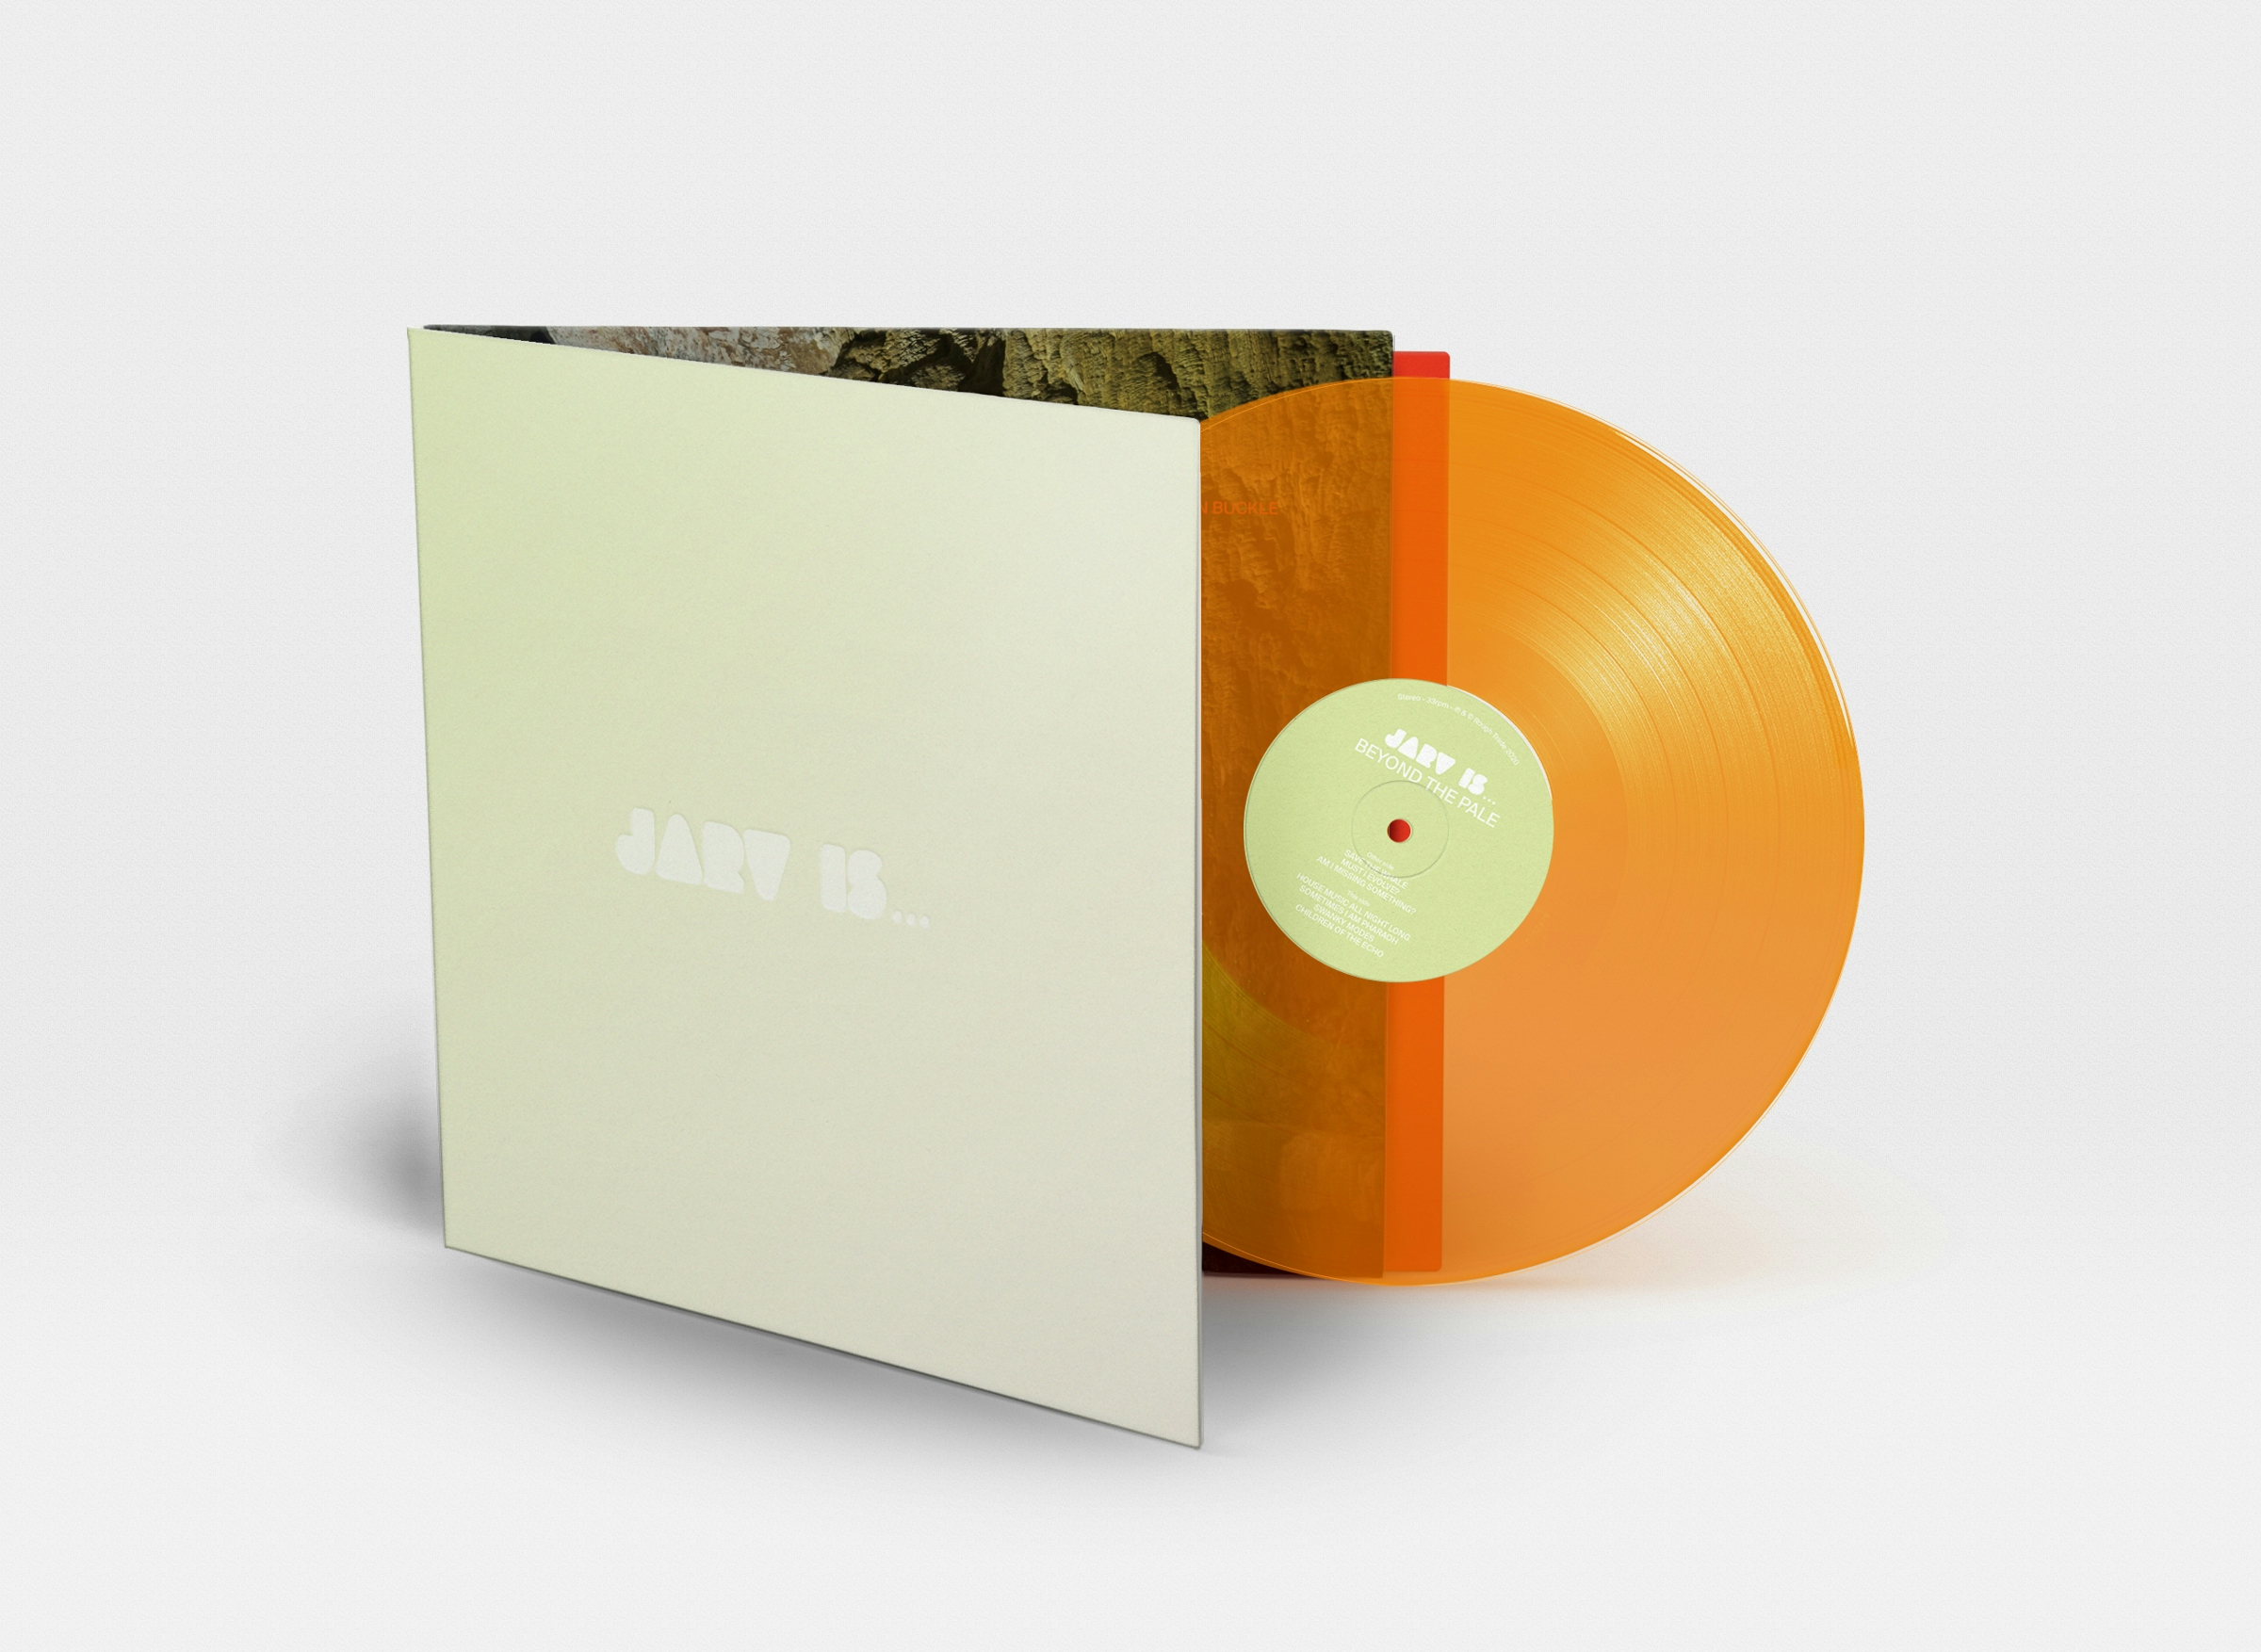 Album artwork for Beyond the Pale by JARV IS... 